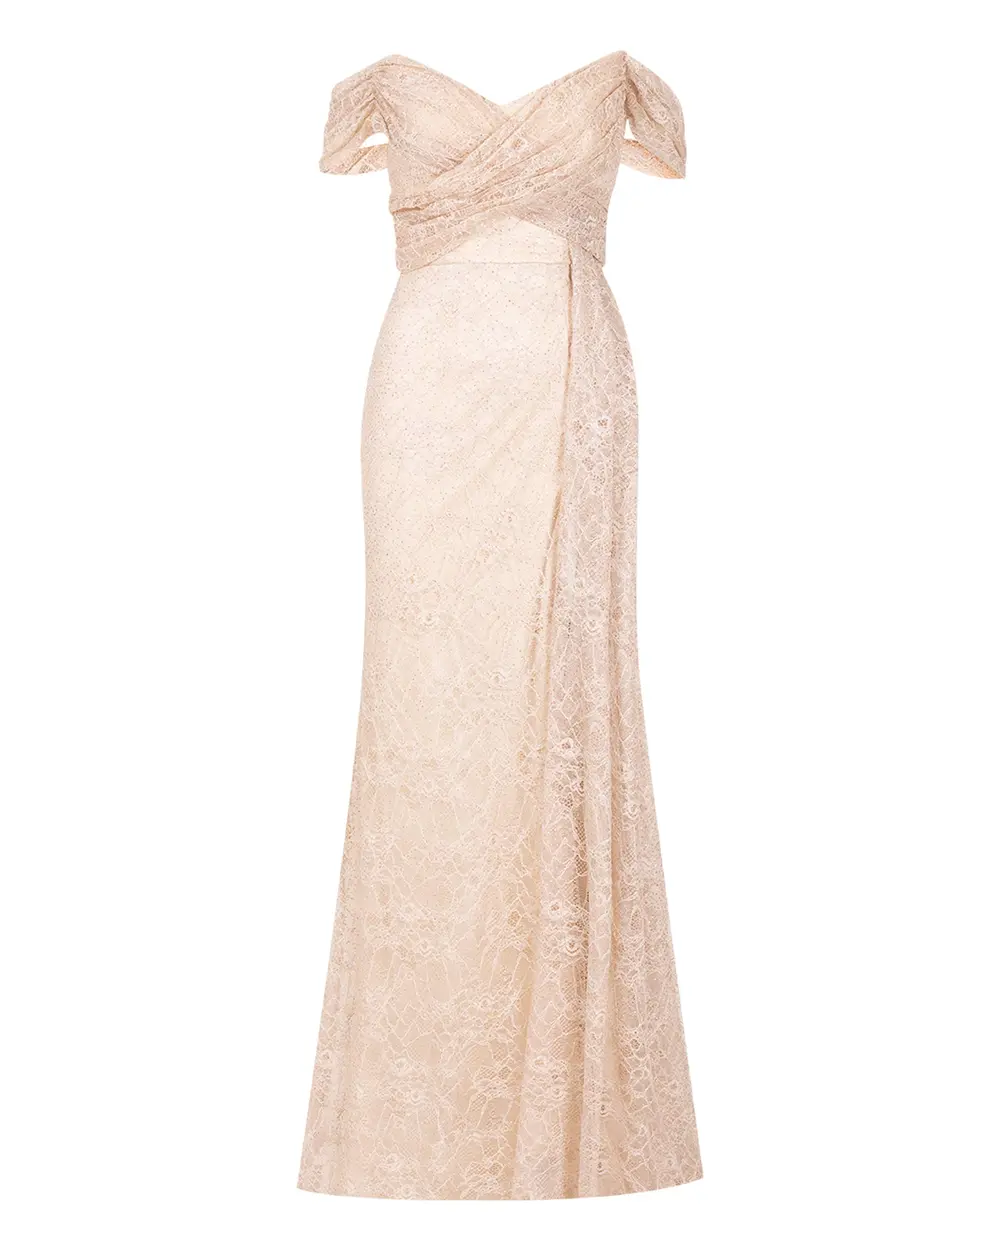 Shimmer Detailed Lace Evening Dress